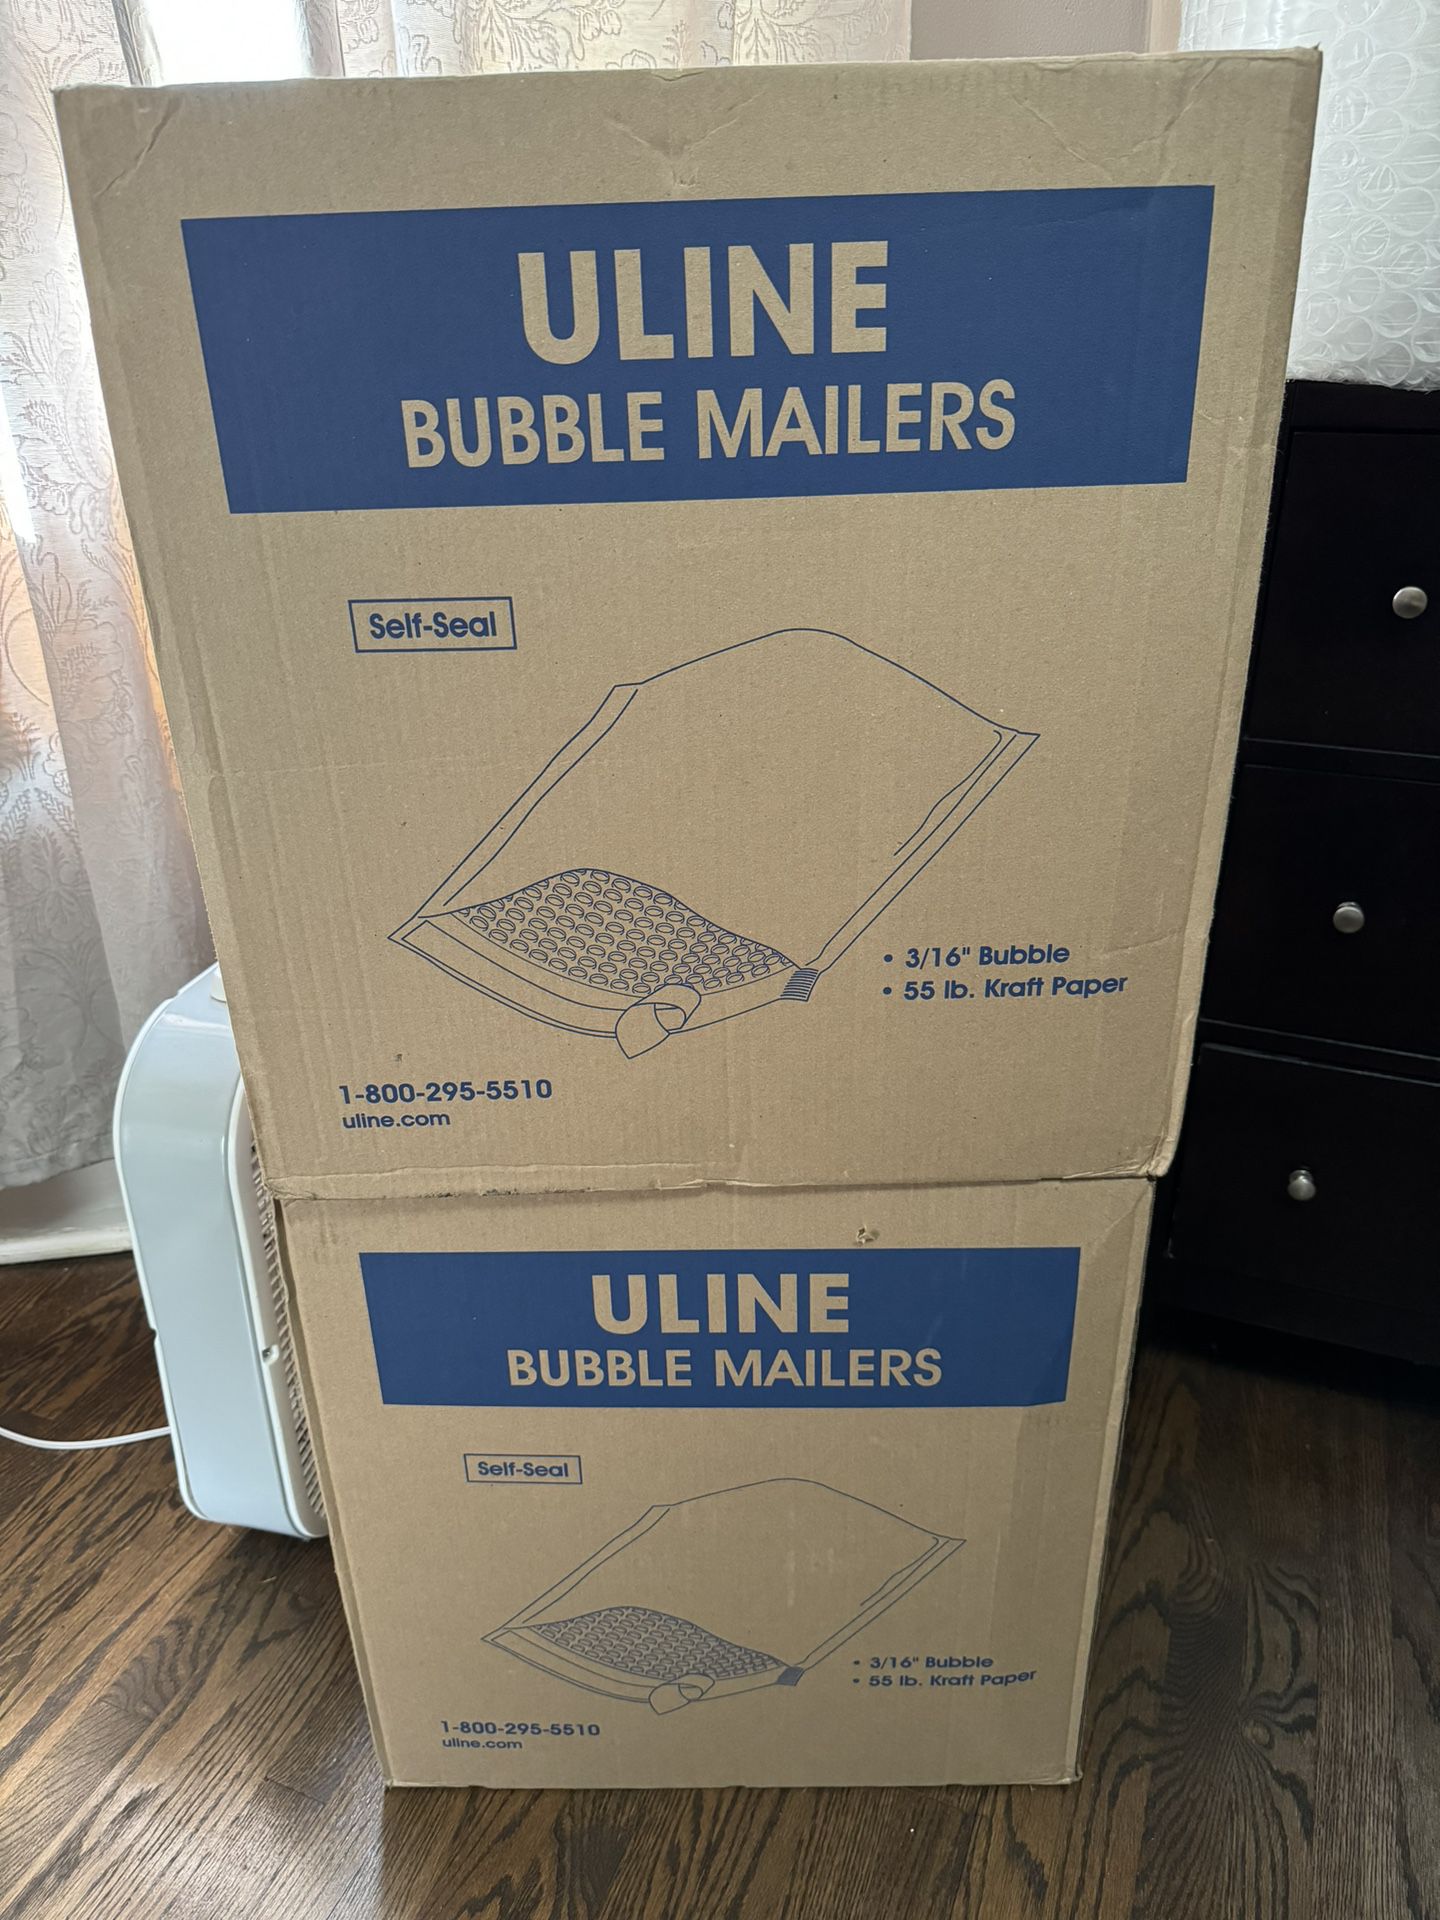 Uline bubble Mailers Pack Of 250/ Pieces 2 Boxes With Bubble Wrap 